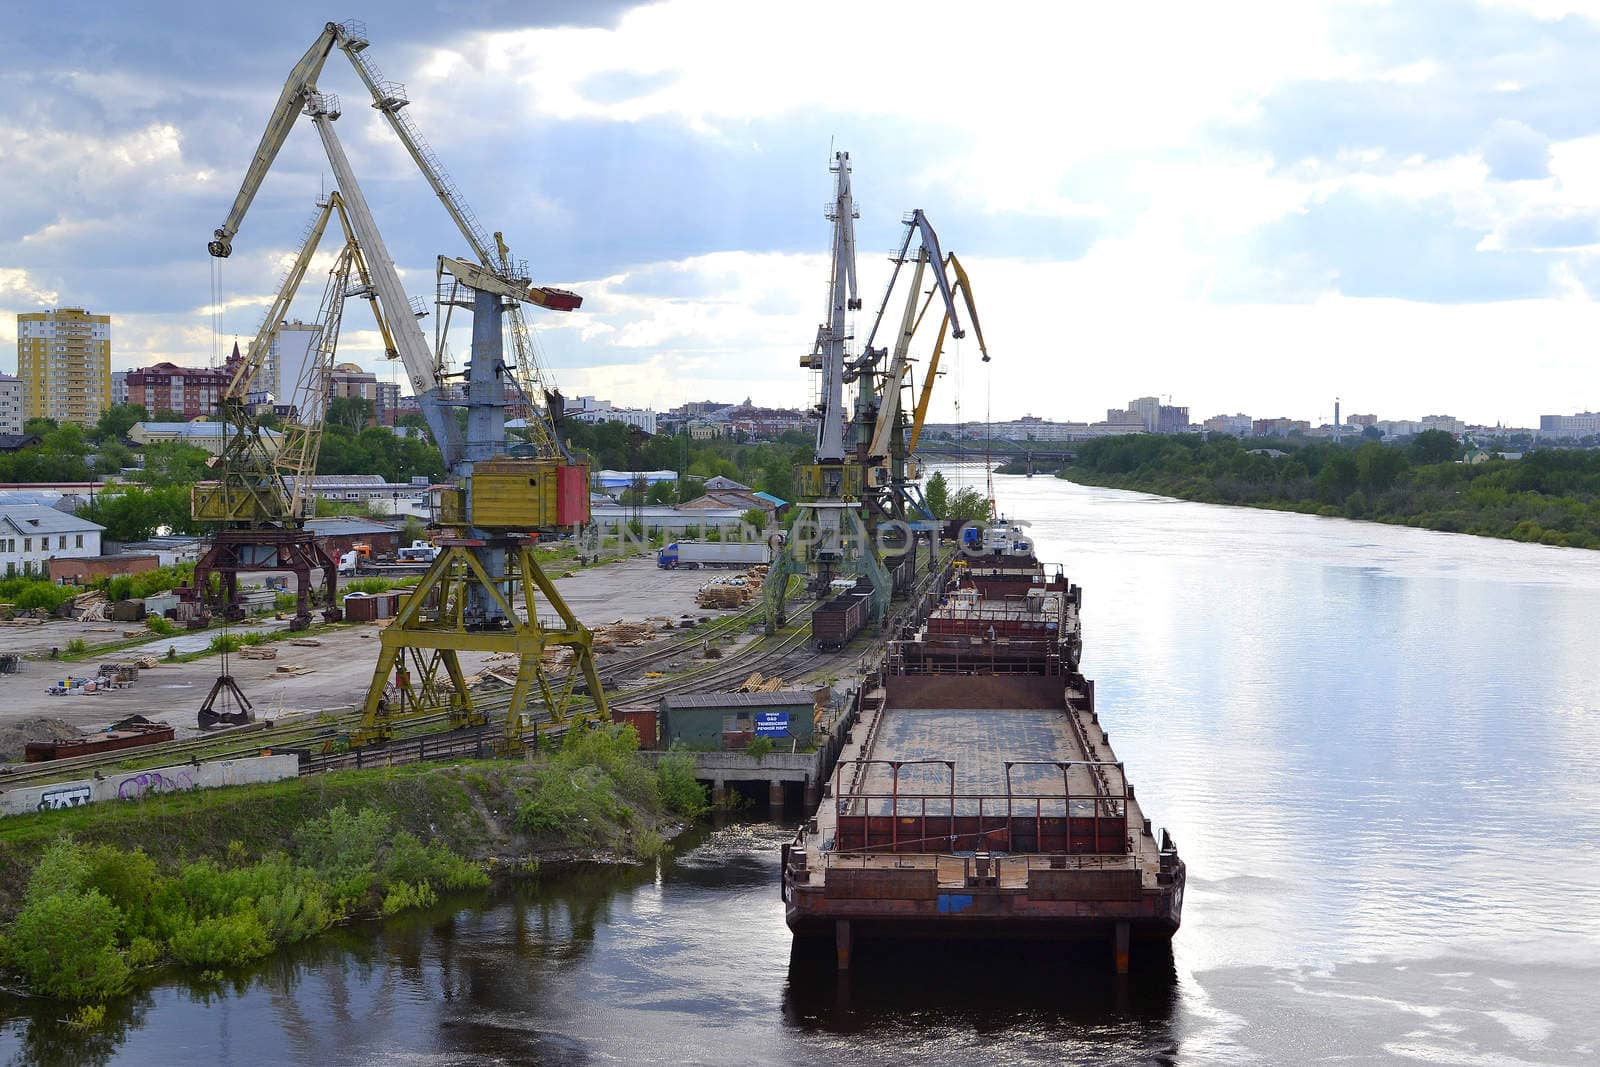 River port on the Tura River in Tyumen, Russia by veronka72